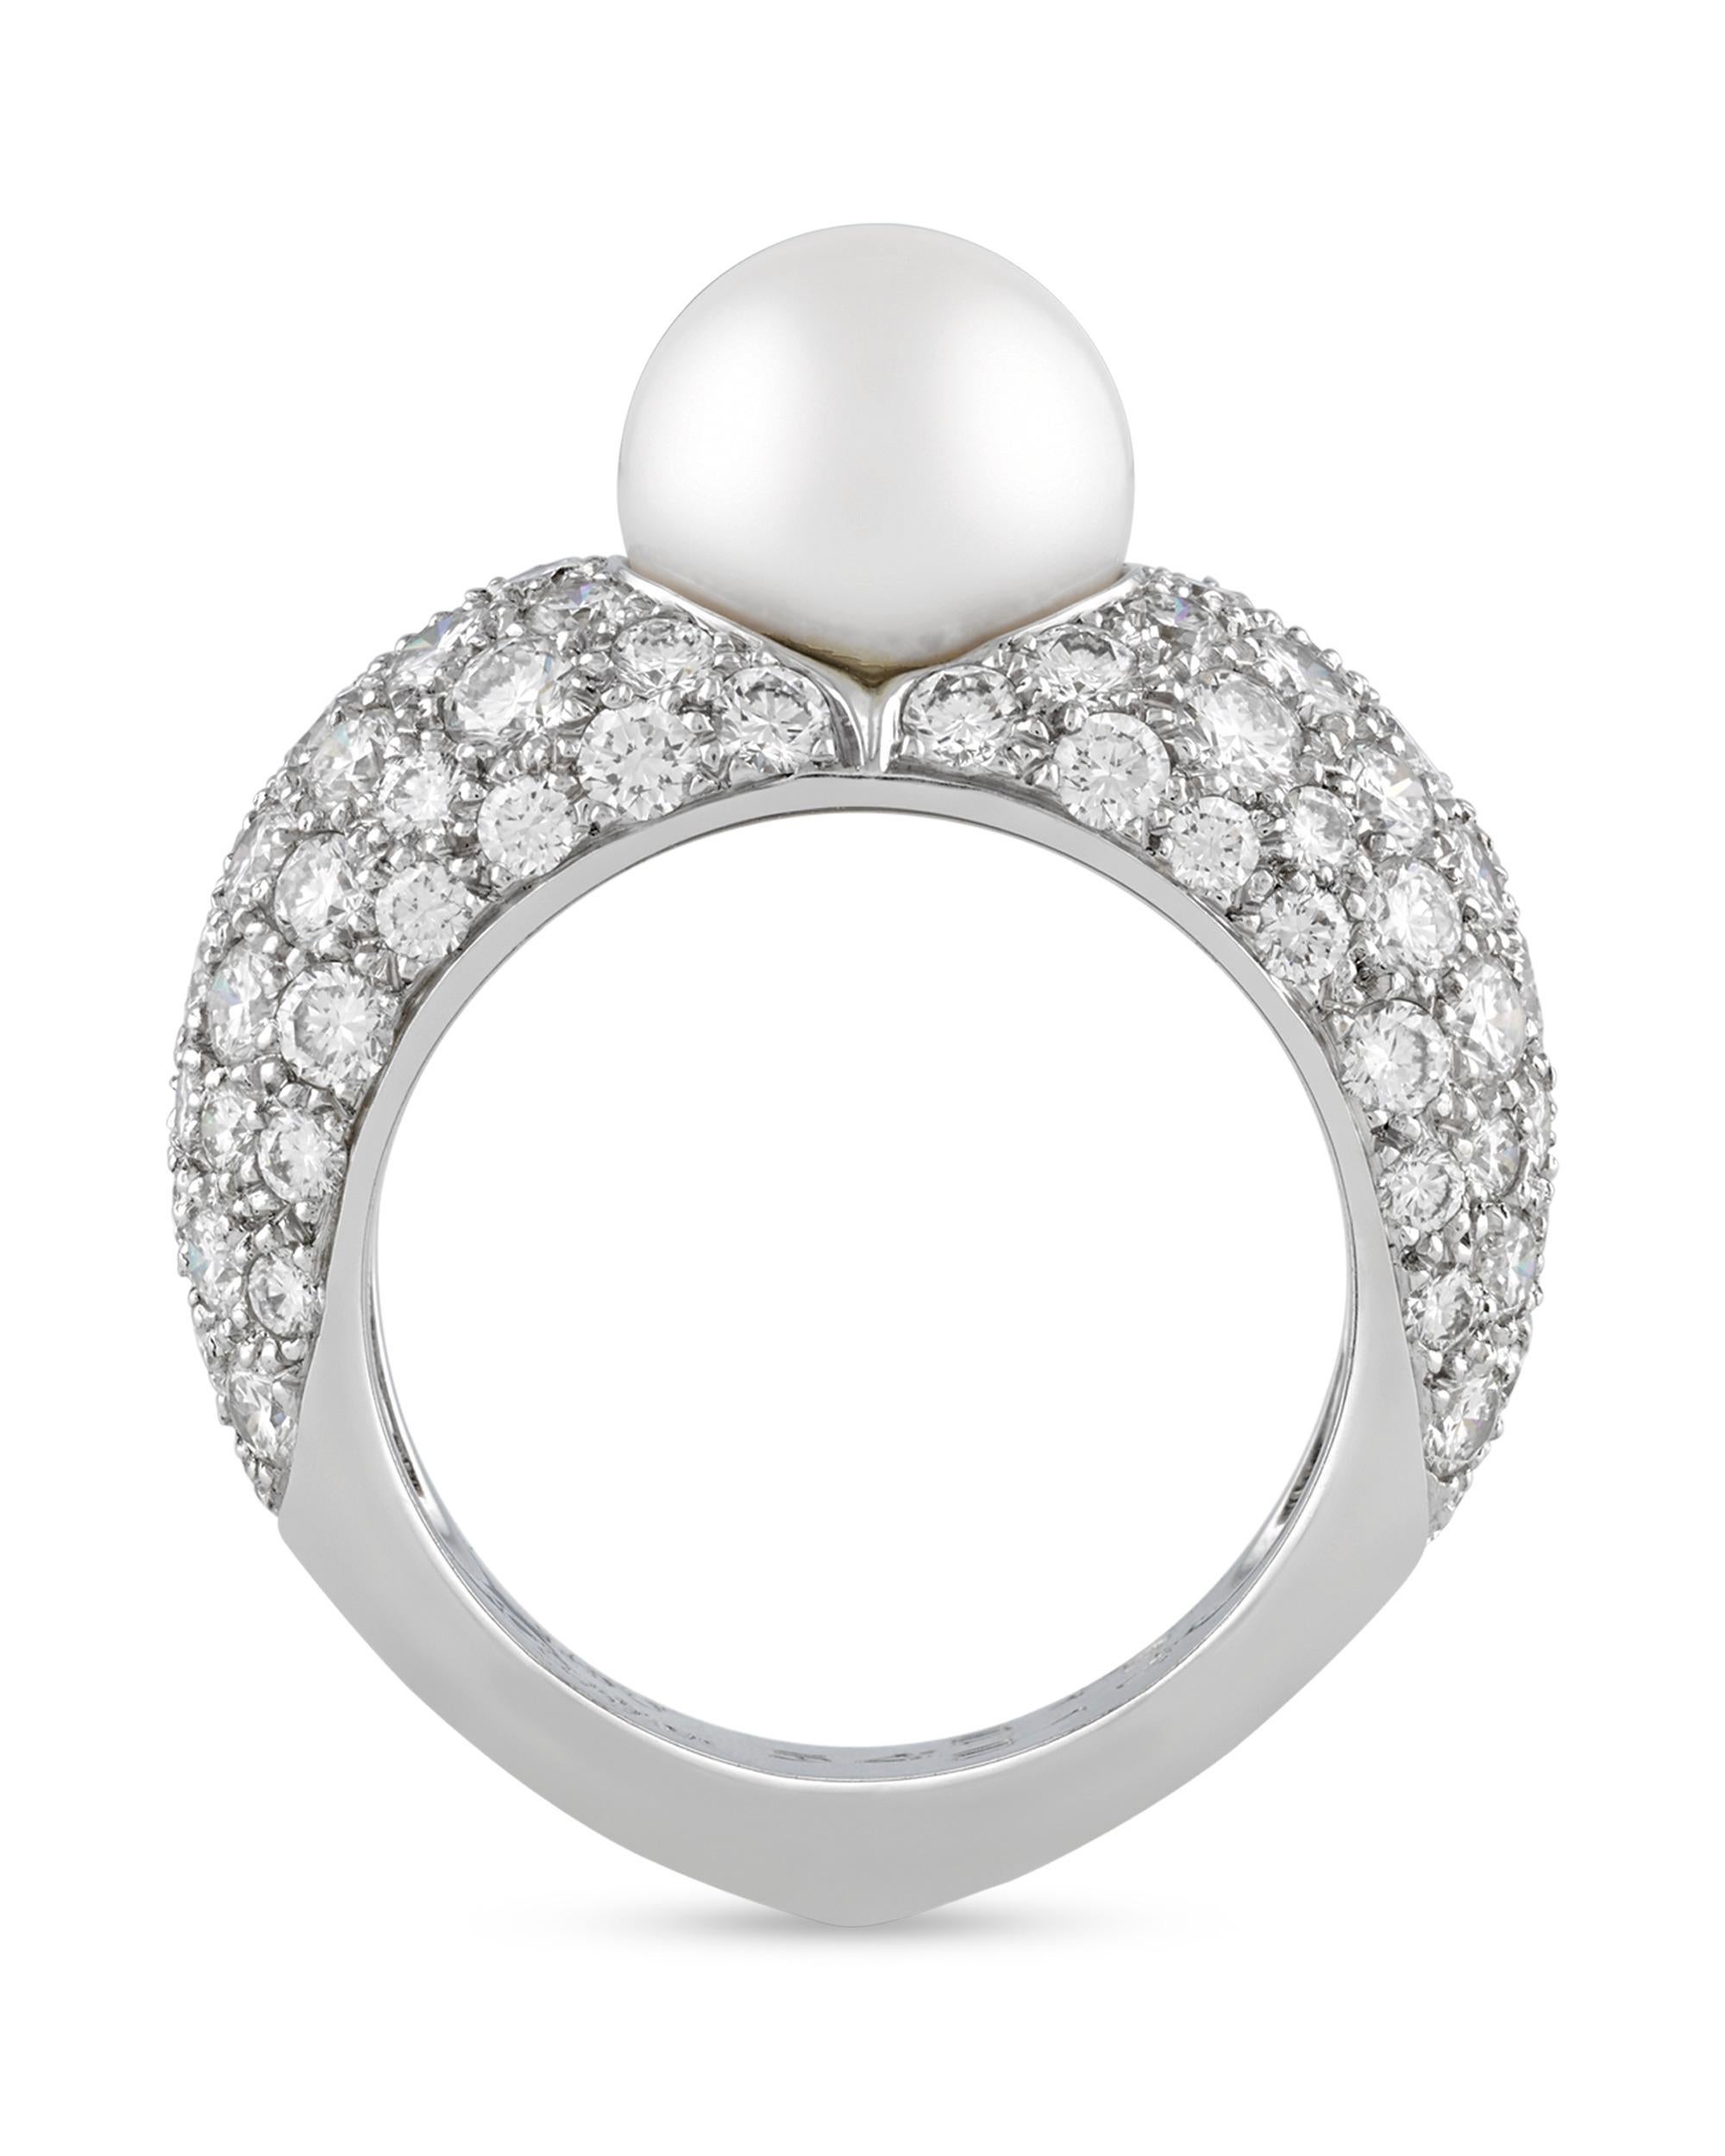 This classic and stylish ring from the celebrated house of Cartier is an elegant example of modern jewelry design. Crafted of 18K white gold, the ring is set with a 9mm white pearl at its center, while approximately 1.00 total carat of diamonds are